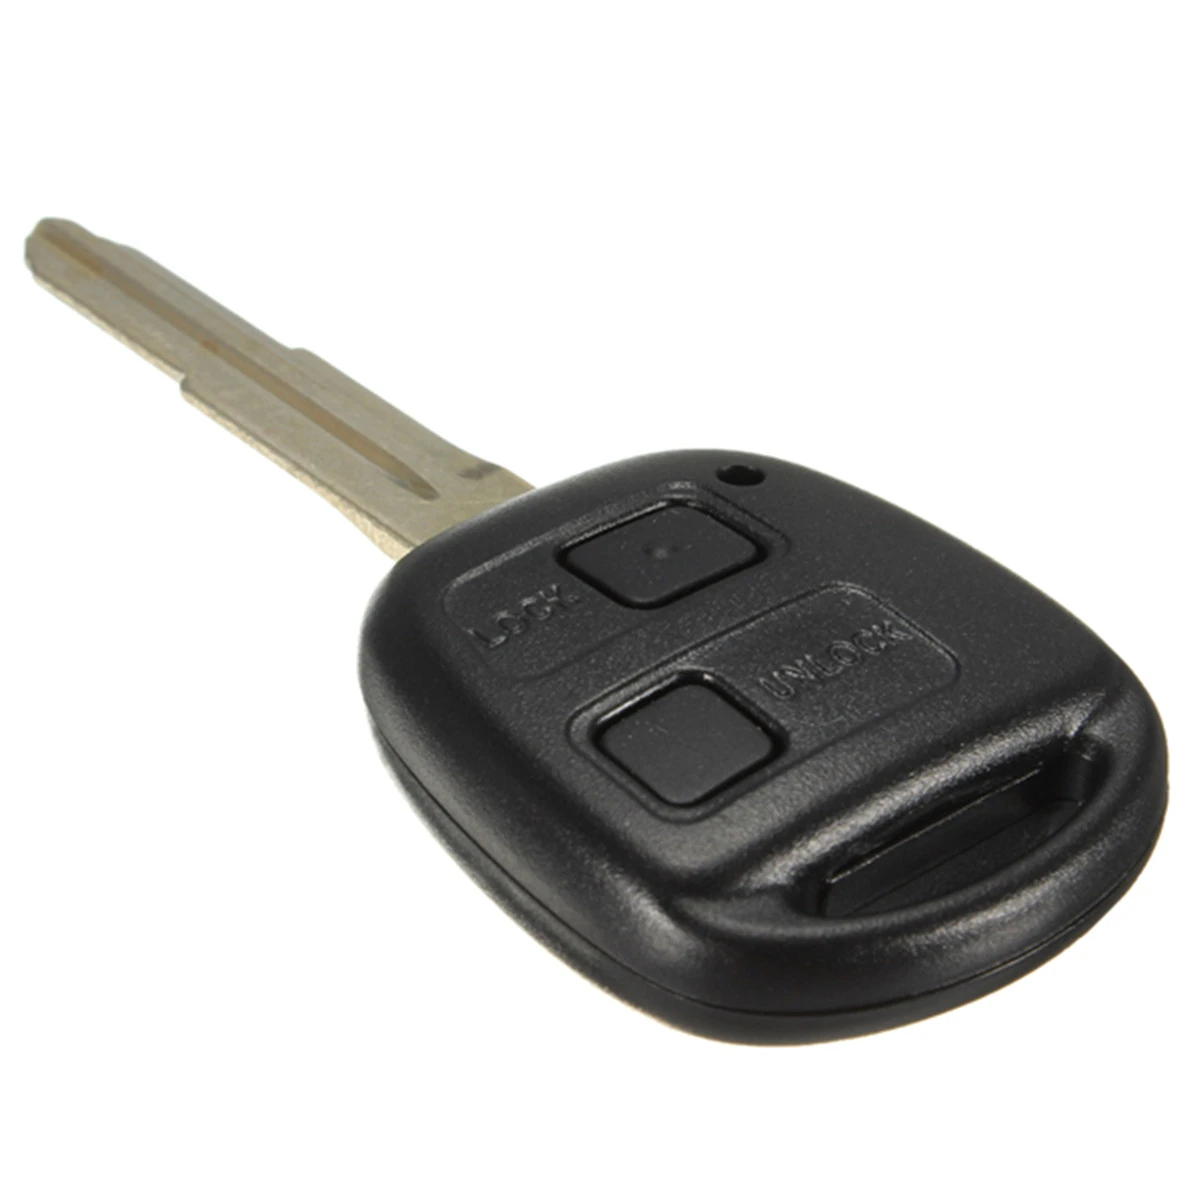 1* For Toyota Avensis Car Remote Fob Rubber Key Pad 2/3 Buttons Replacement